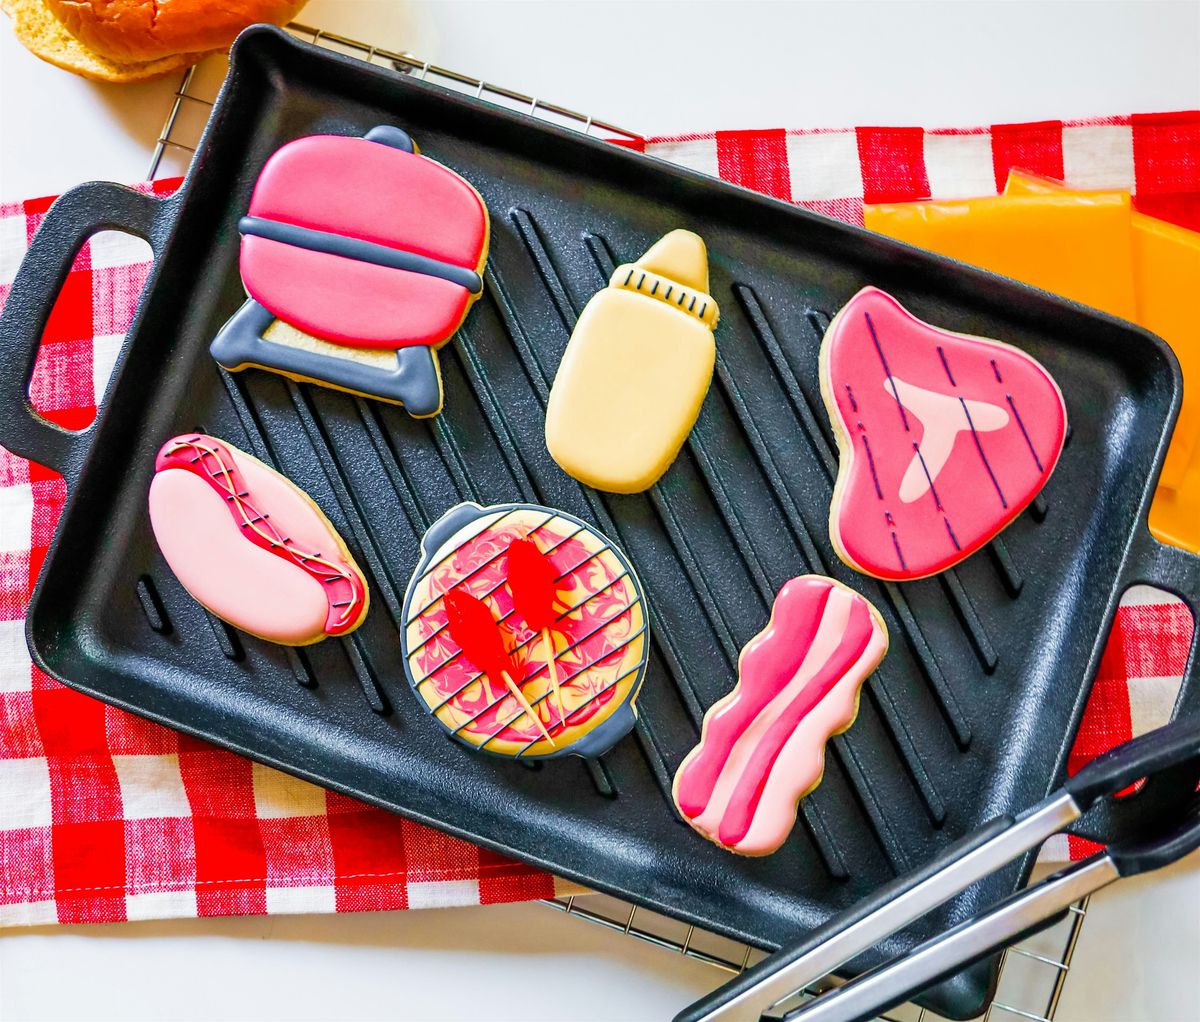 Grill & Chill August Cookie Decorating Class! 1:30pm